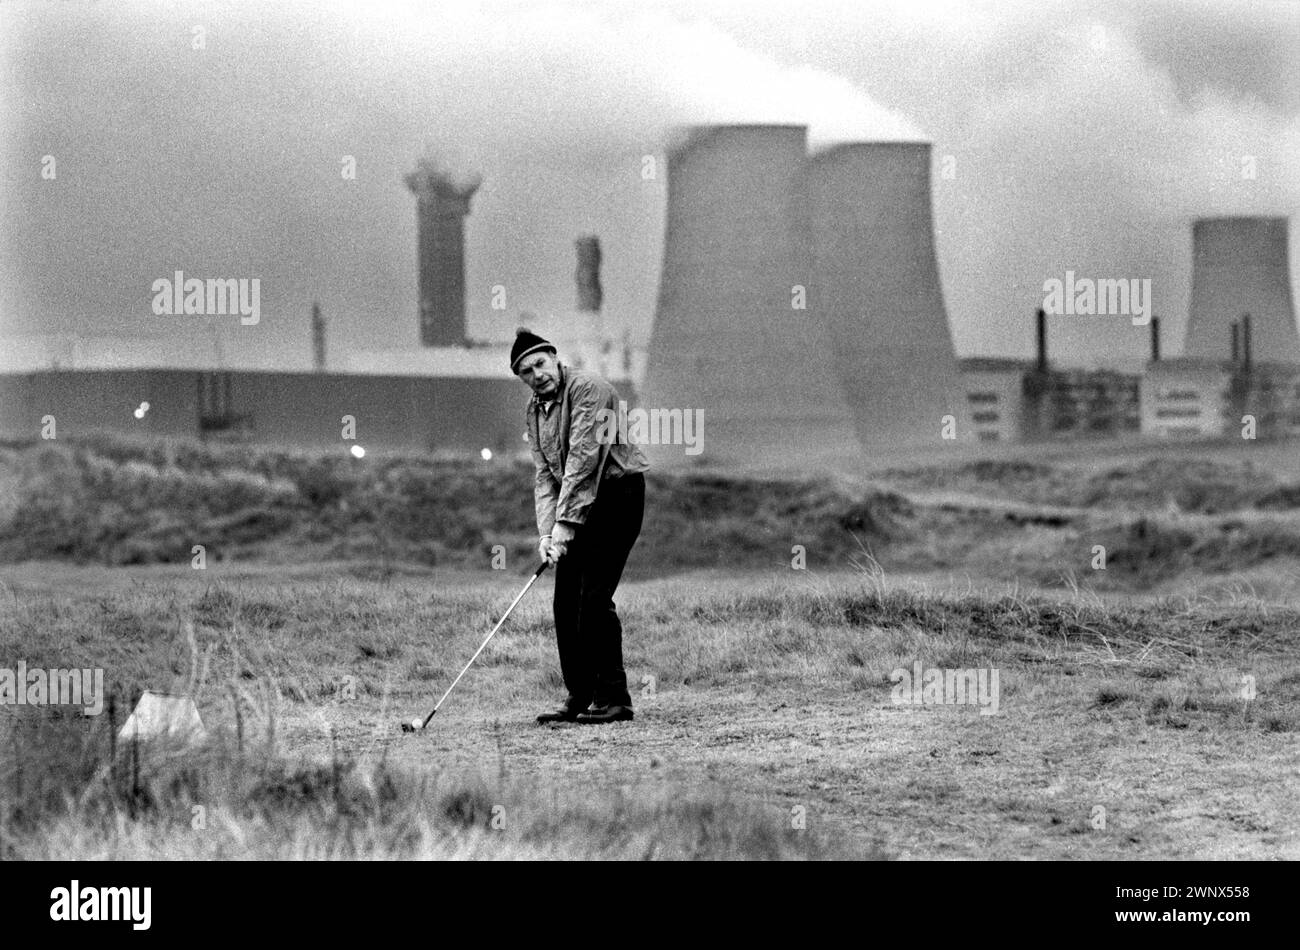 Nuclear Power Plant UK. Windscale and Calder Nuclear processing plant. British Nuclear Fuels. The Windscale Piles (one in this photo) were two air-cooled graphite-moderated nuclear reactors on the Windscale nuclear site in Cumberland (now known as Sellafield site, Cumbria) A local man playing on the so called toxic golf course. Windscale, Cumbria, England 1983. 1980s UK HOMER SYKES Stock Photo